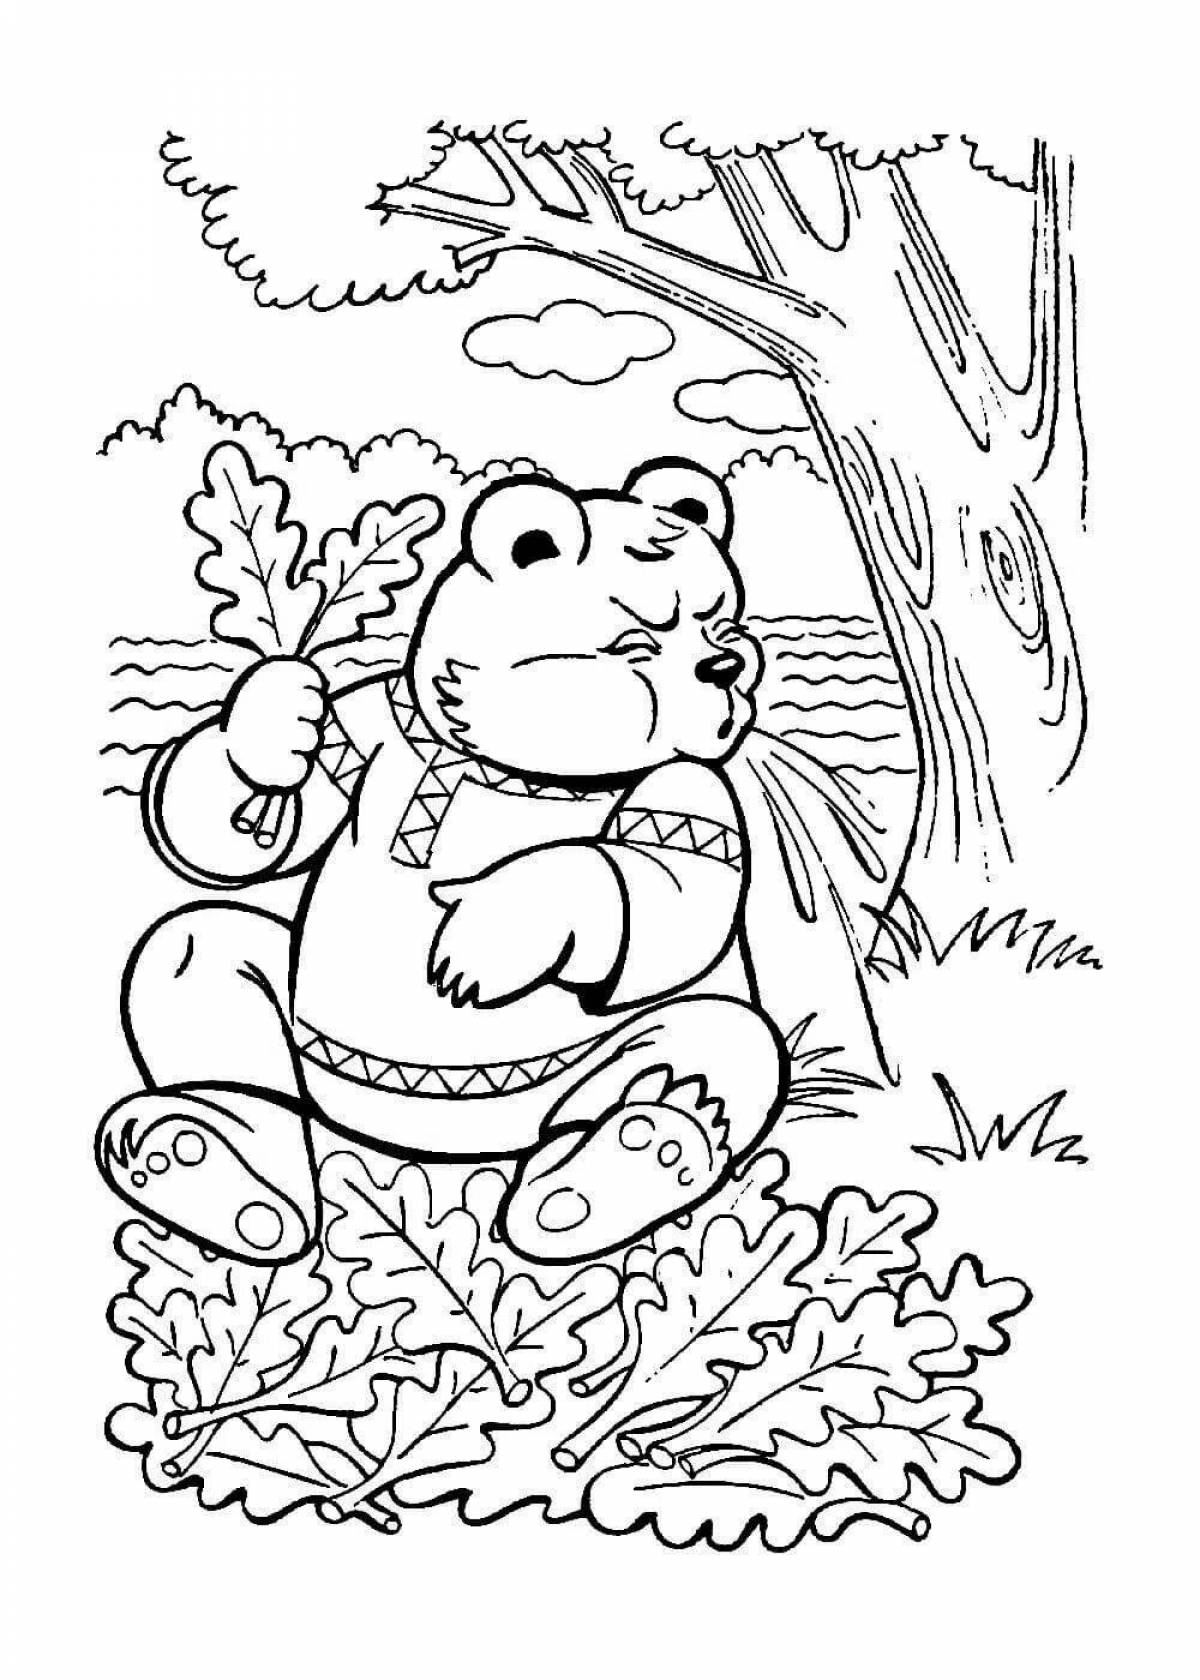 Creative coloring page tops and roots